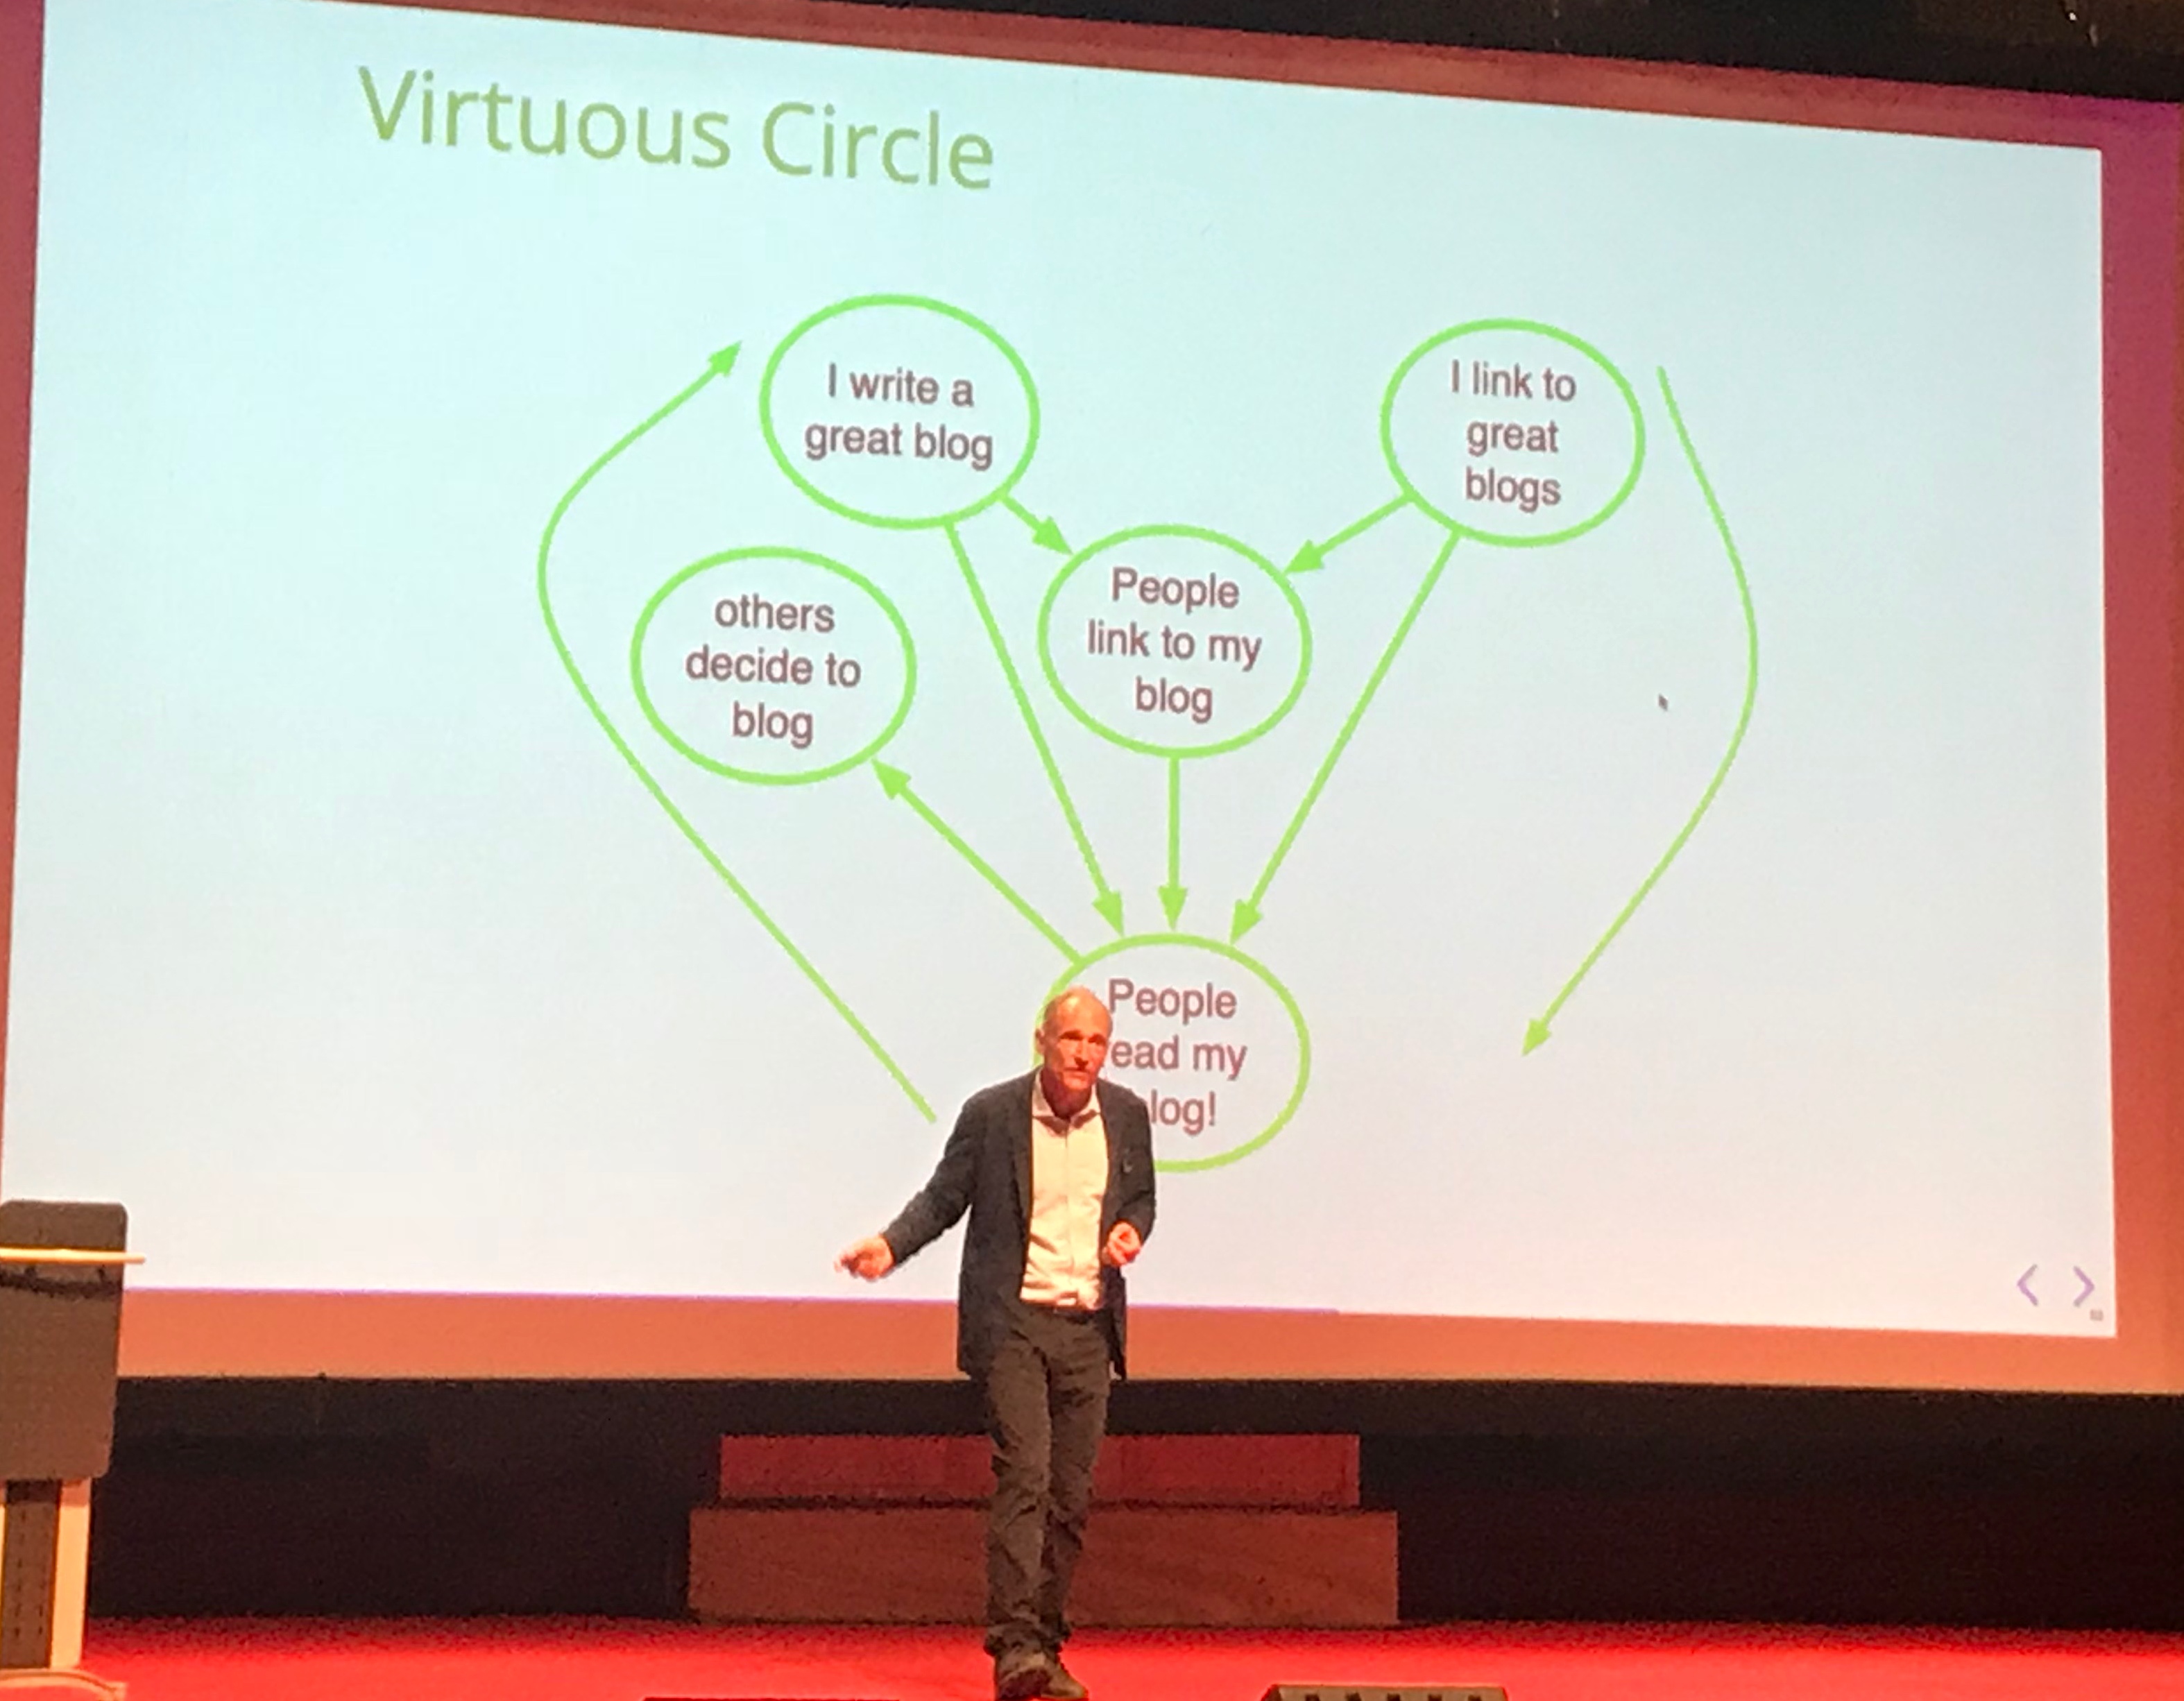 Tim Berners Lee in front of slide showing virtuous circle